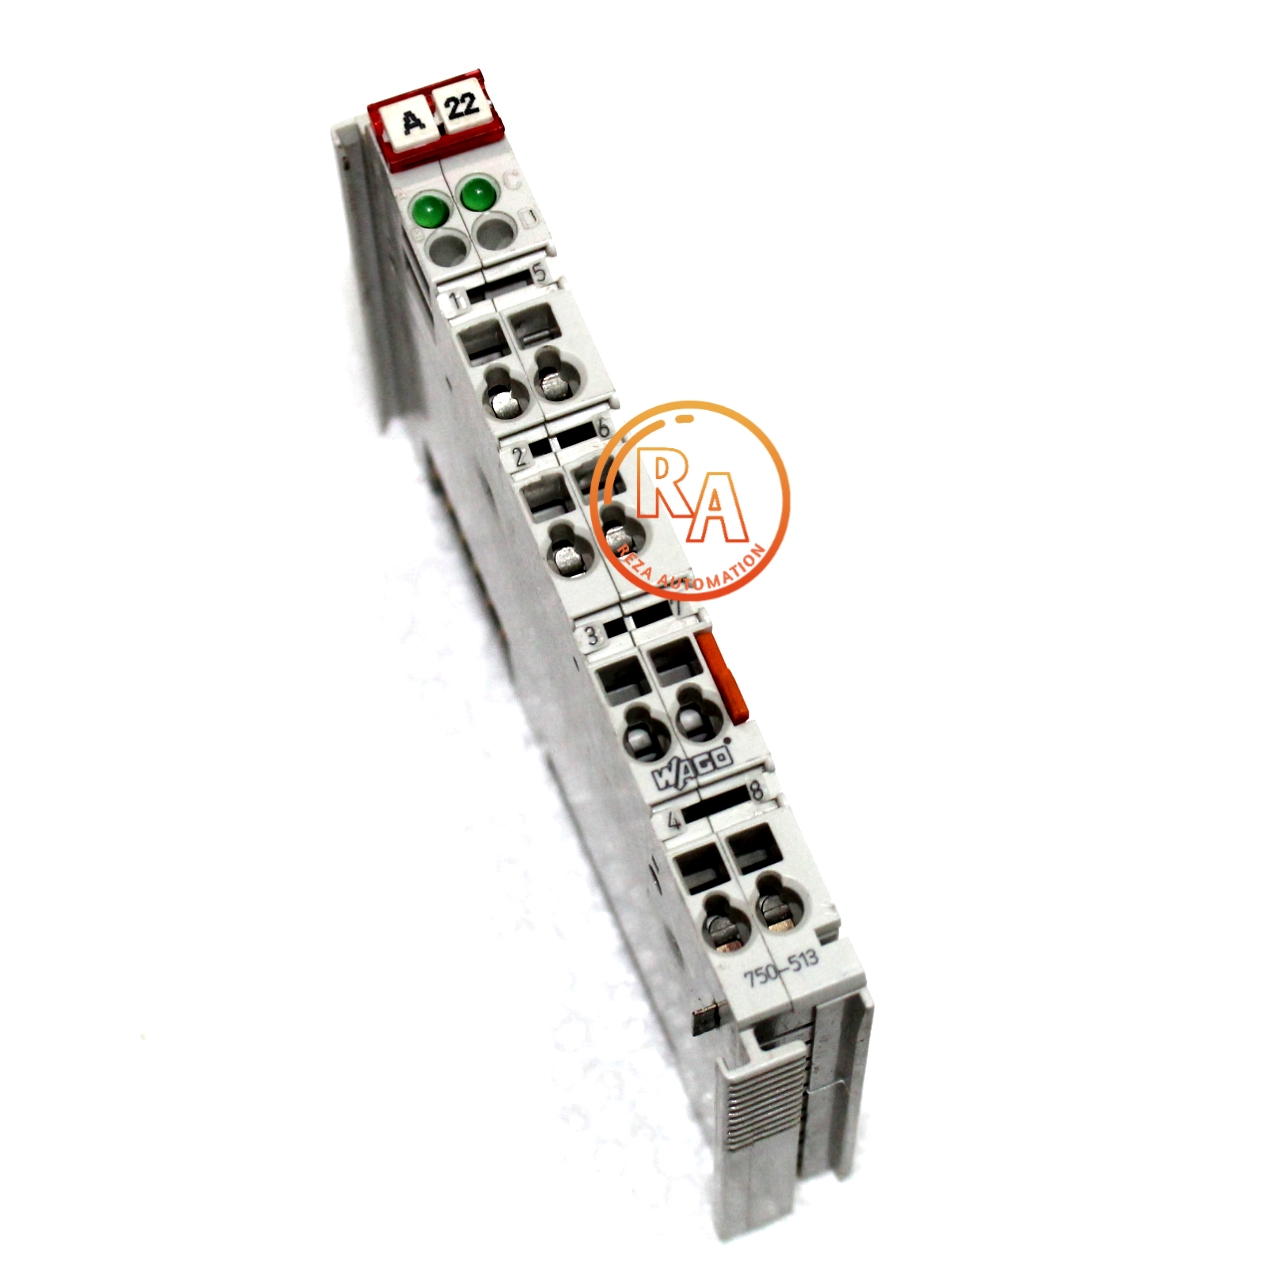 WAGO 750-513 RELAY OUTPUT MODULE 2-CHANNEL